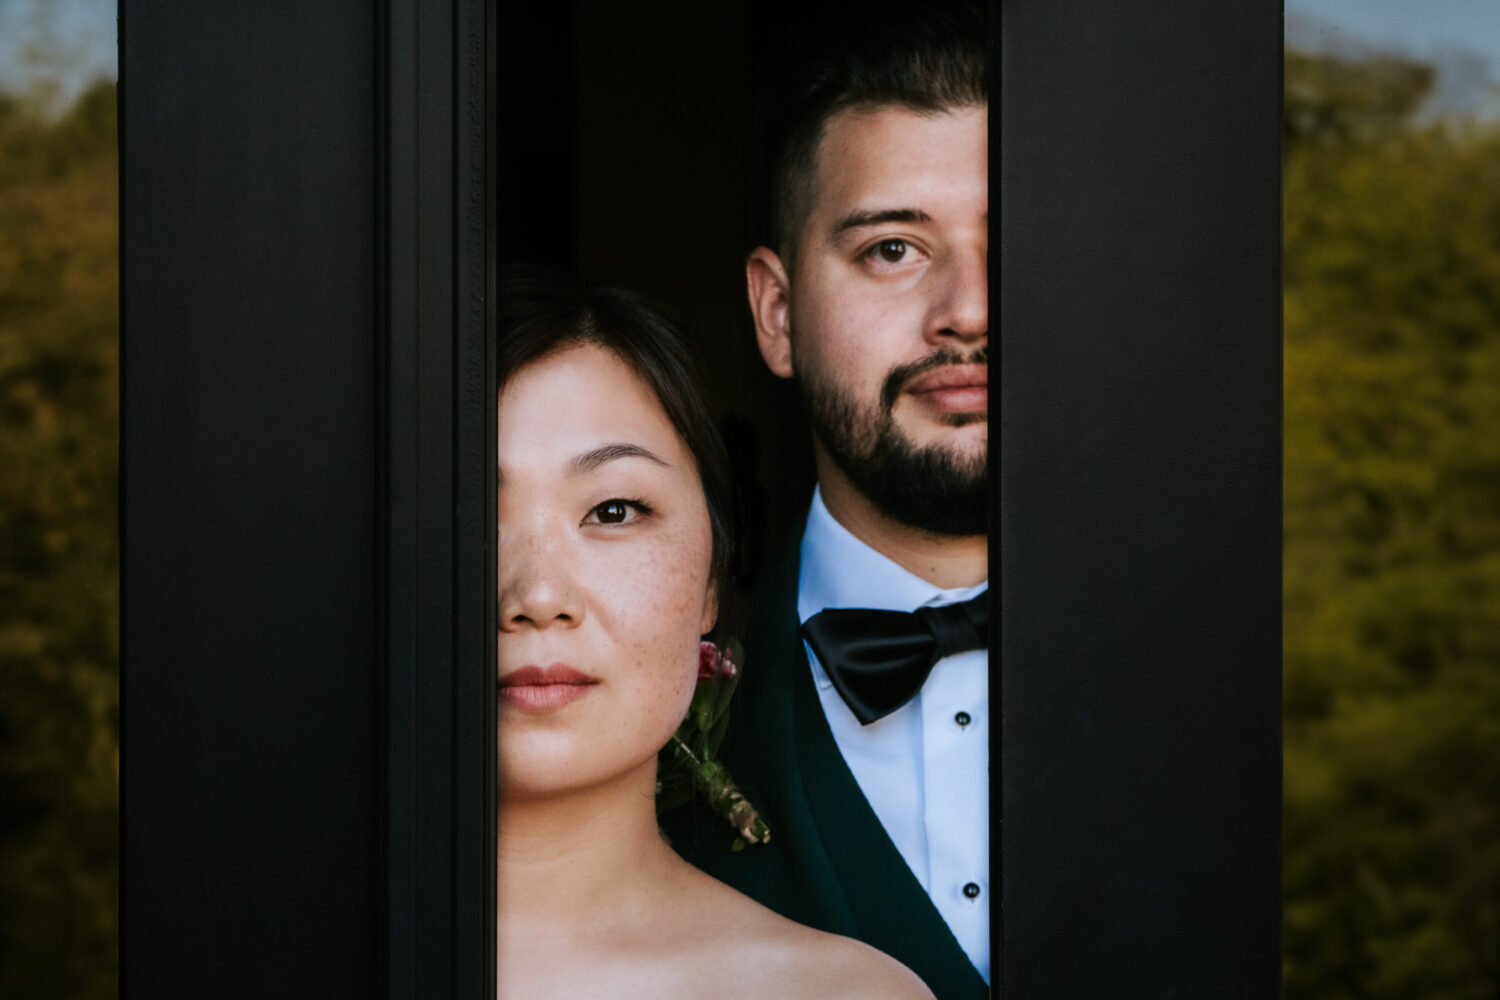 bride and groom looking at camera for a creative portrait at their willow brook wedding day in leesburg, virginia